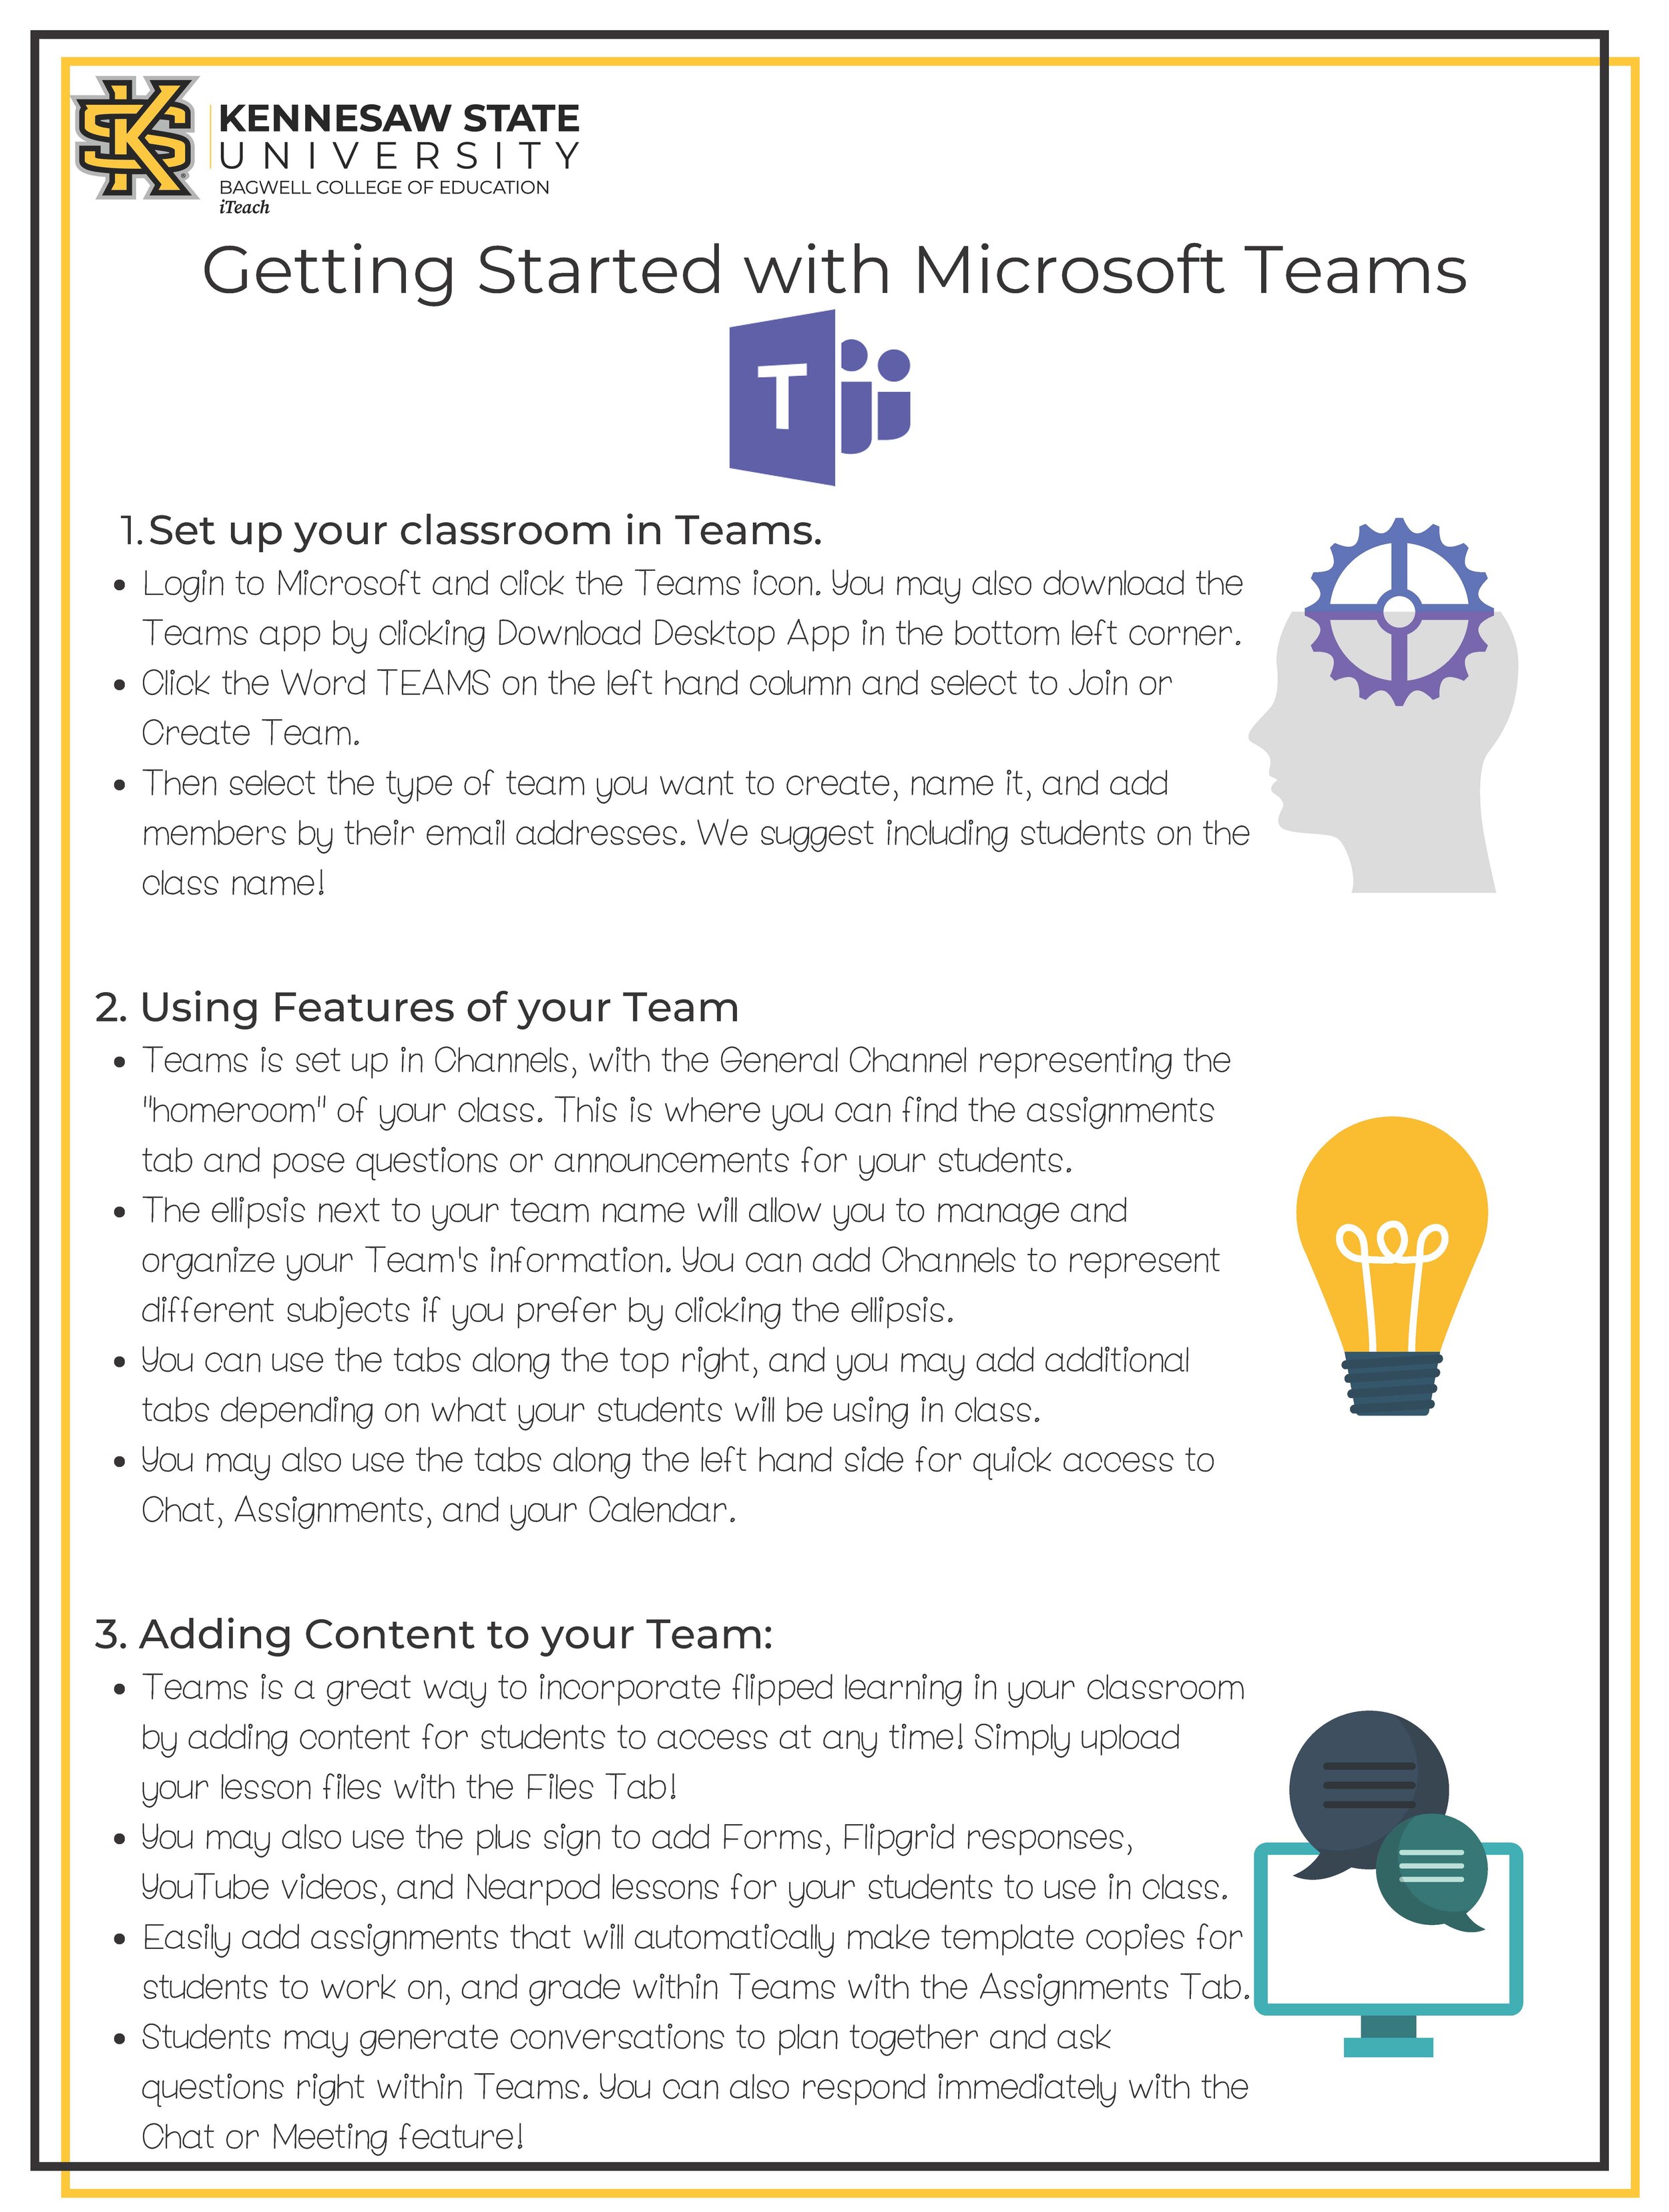 Getting Started with Microsoft Teams.jpg